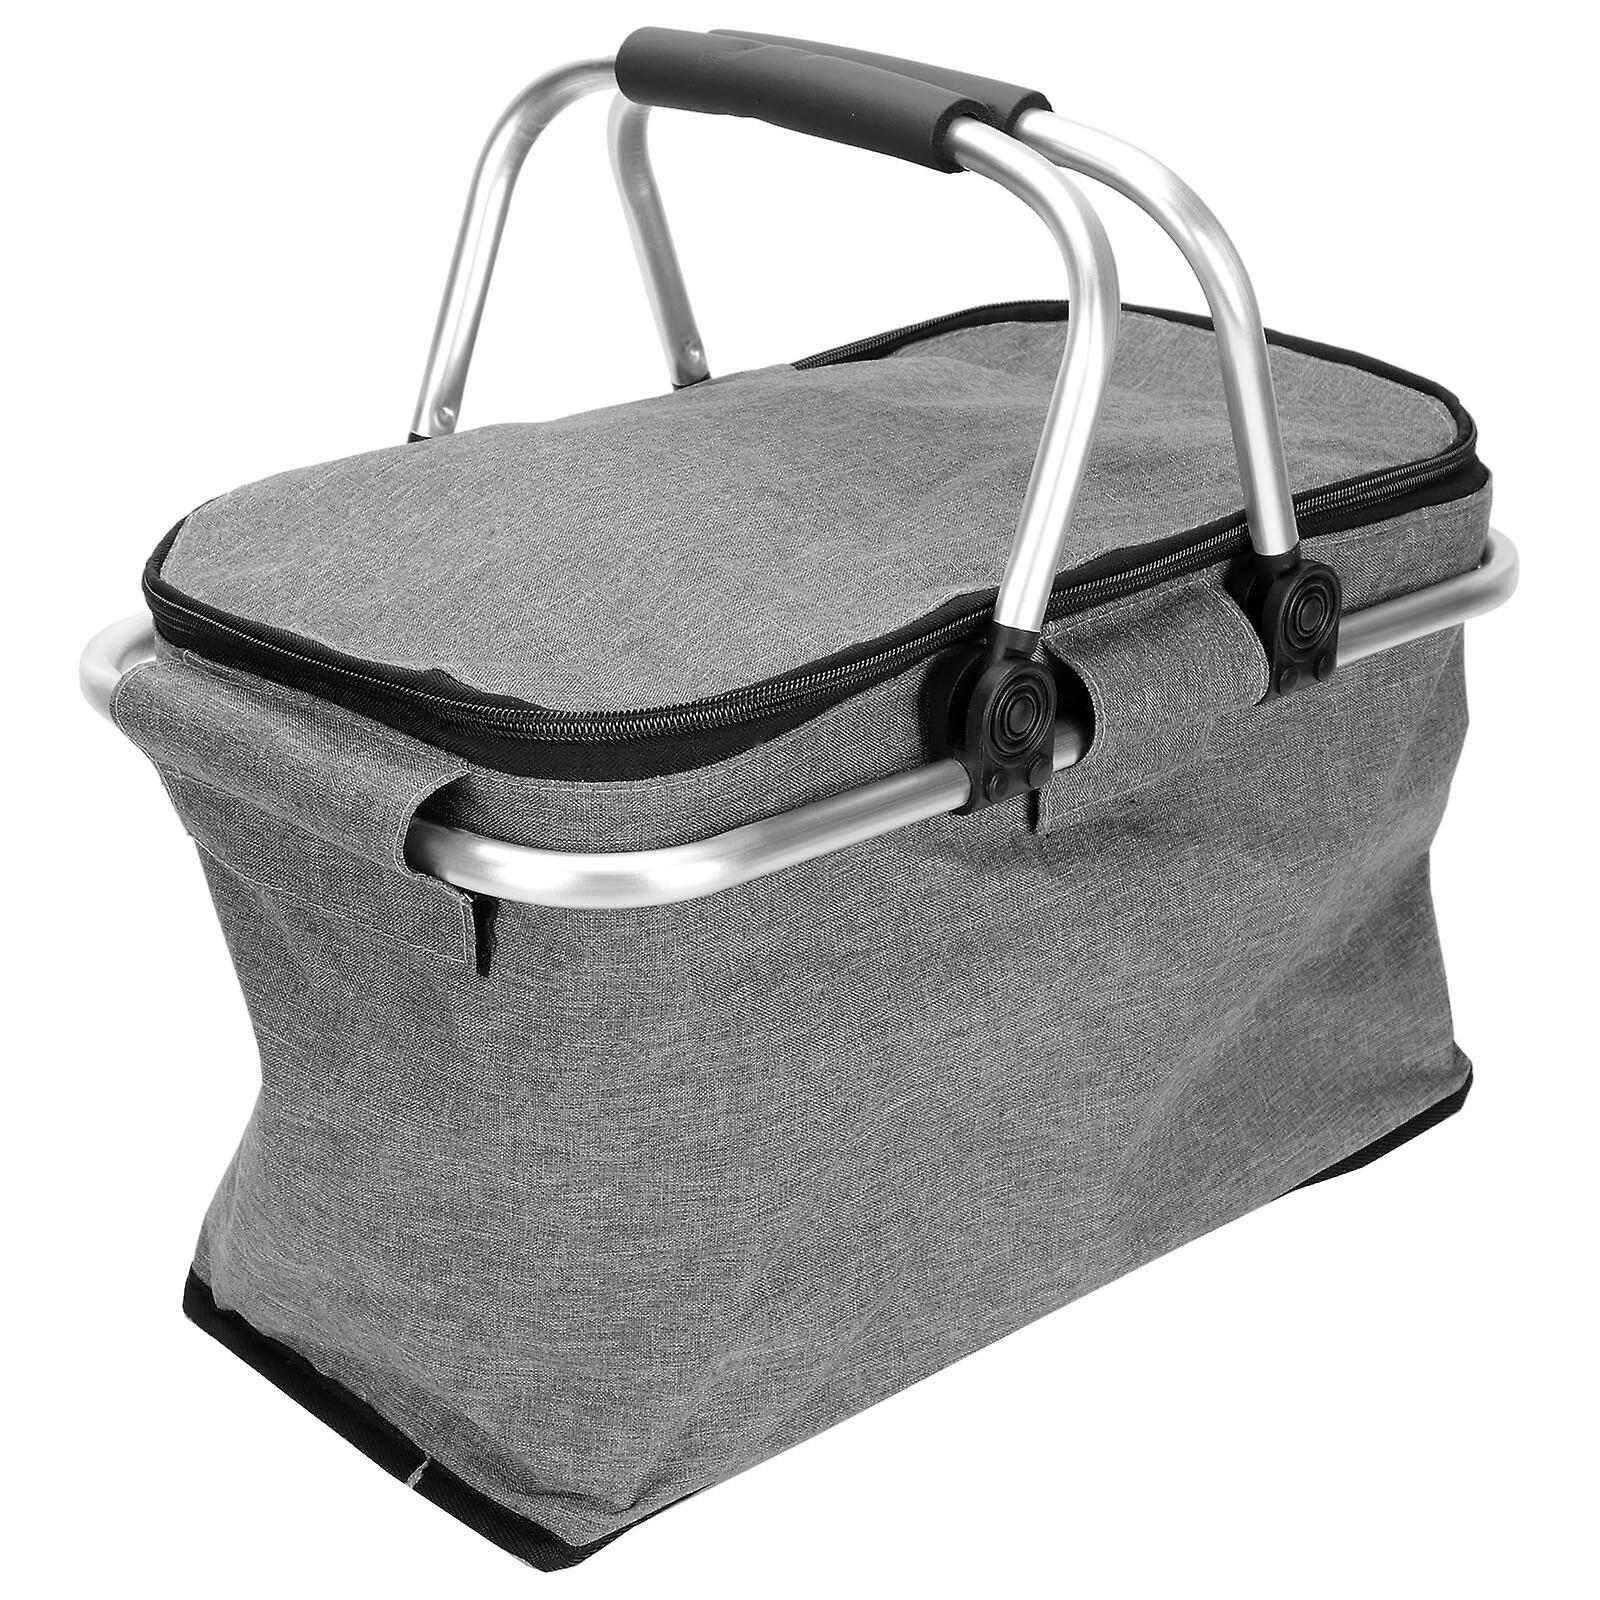 1pc Insulated Picnic Basket Portable Cooler Picnic Bag With Aluminium Handle